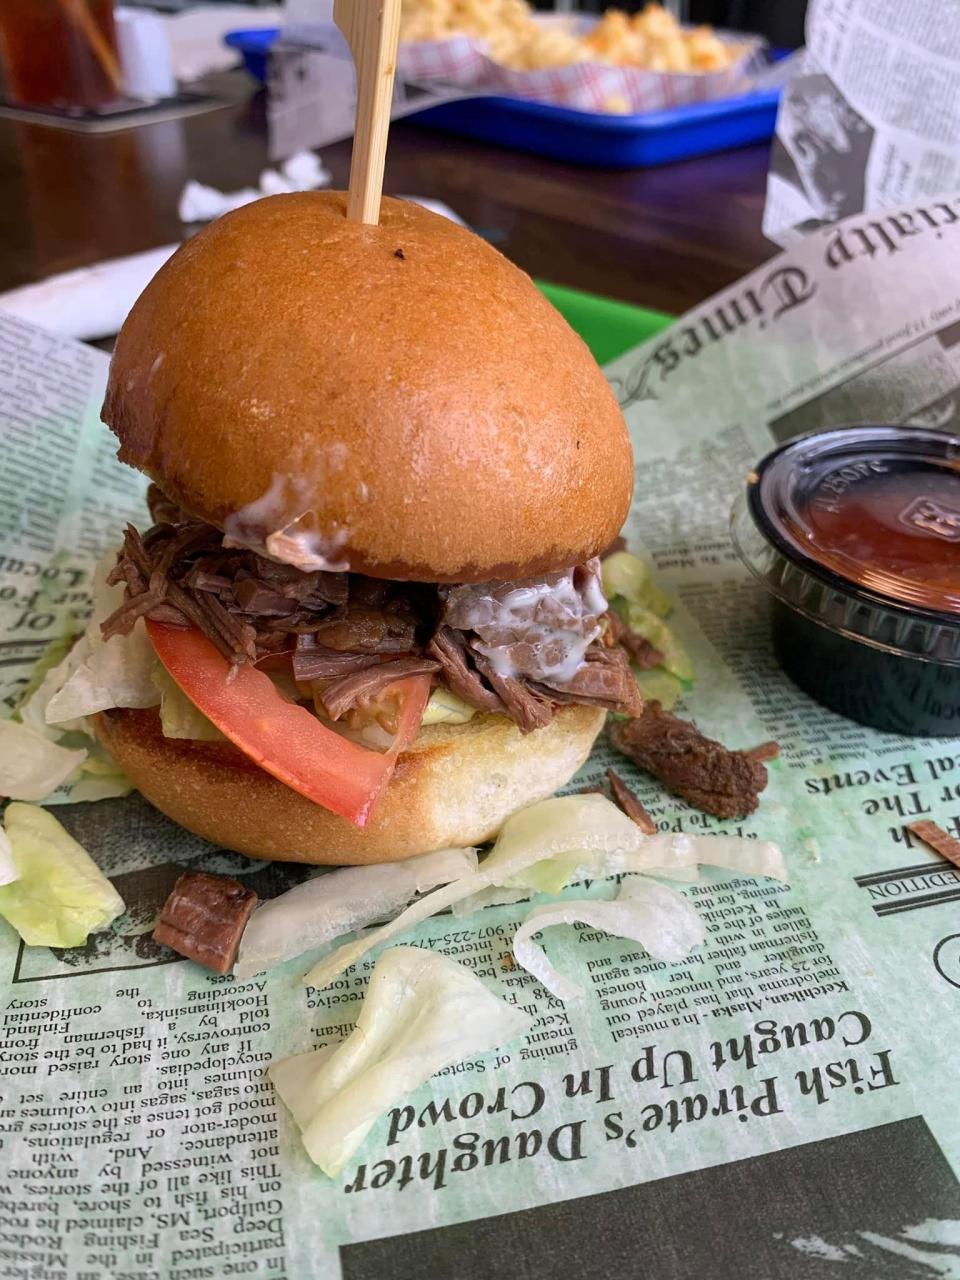 On a recent visit, we opted to try the mom's brisket at Big Daddy J's 5 Great Things Watering Station and Restaurant on a slider.